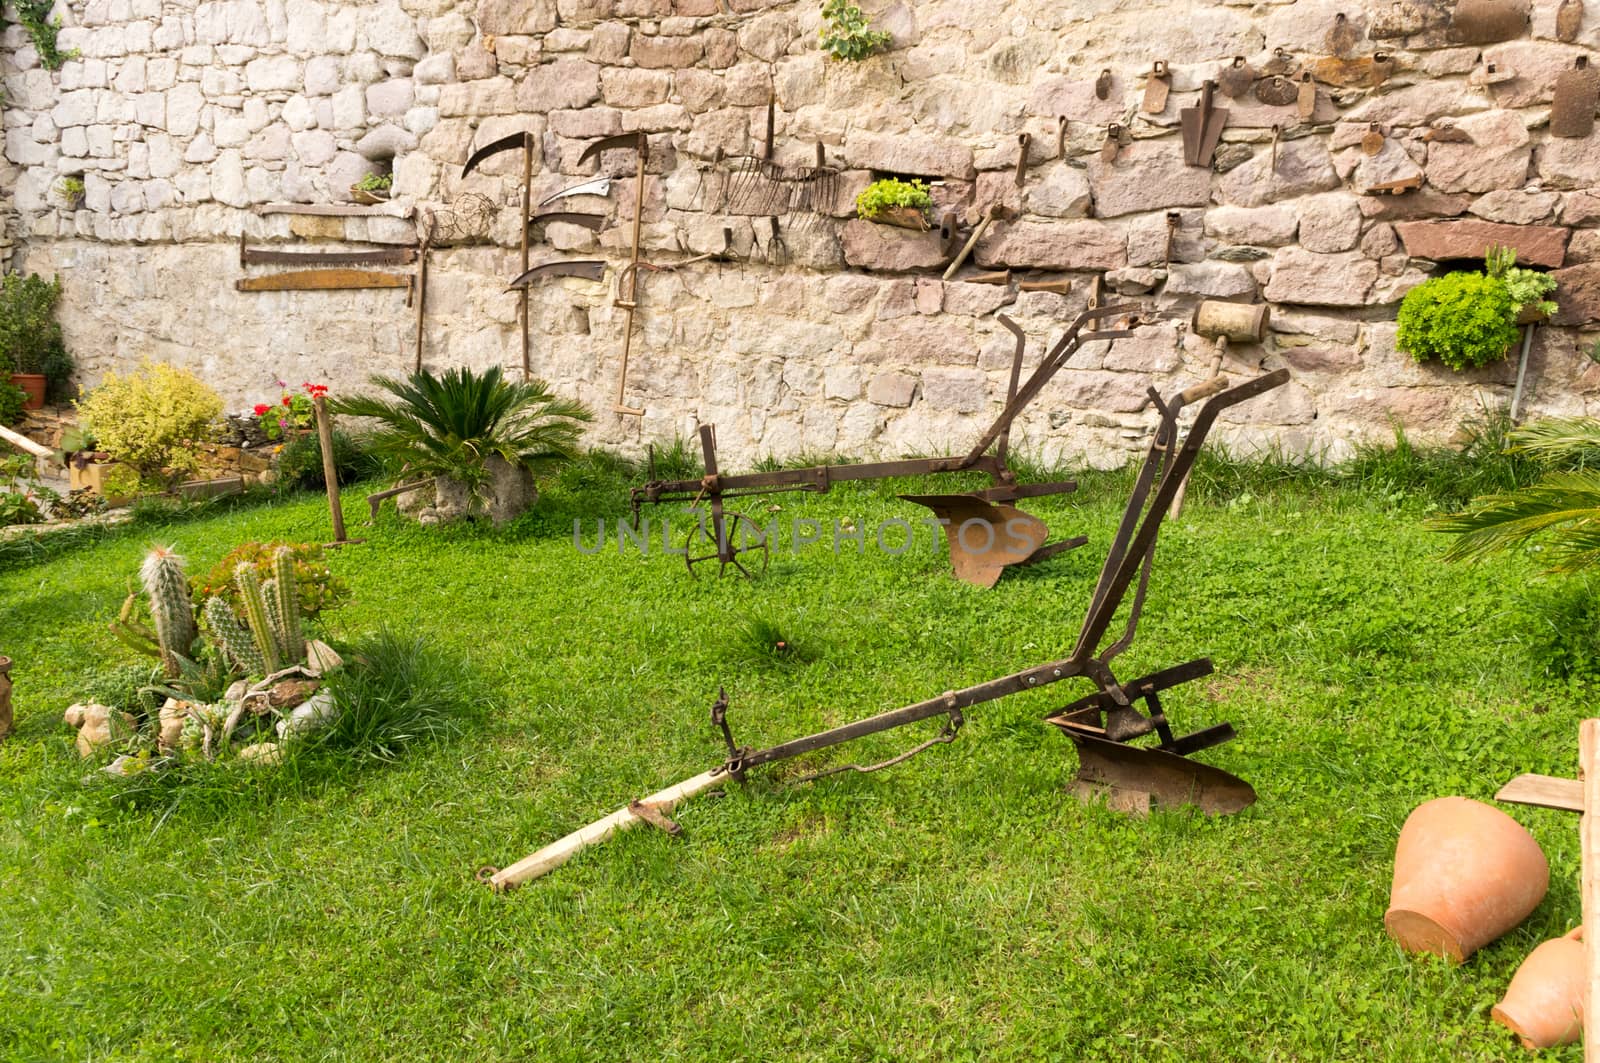 Plow and old gardening tools by Spritz77